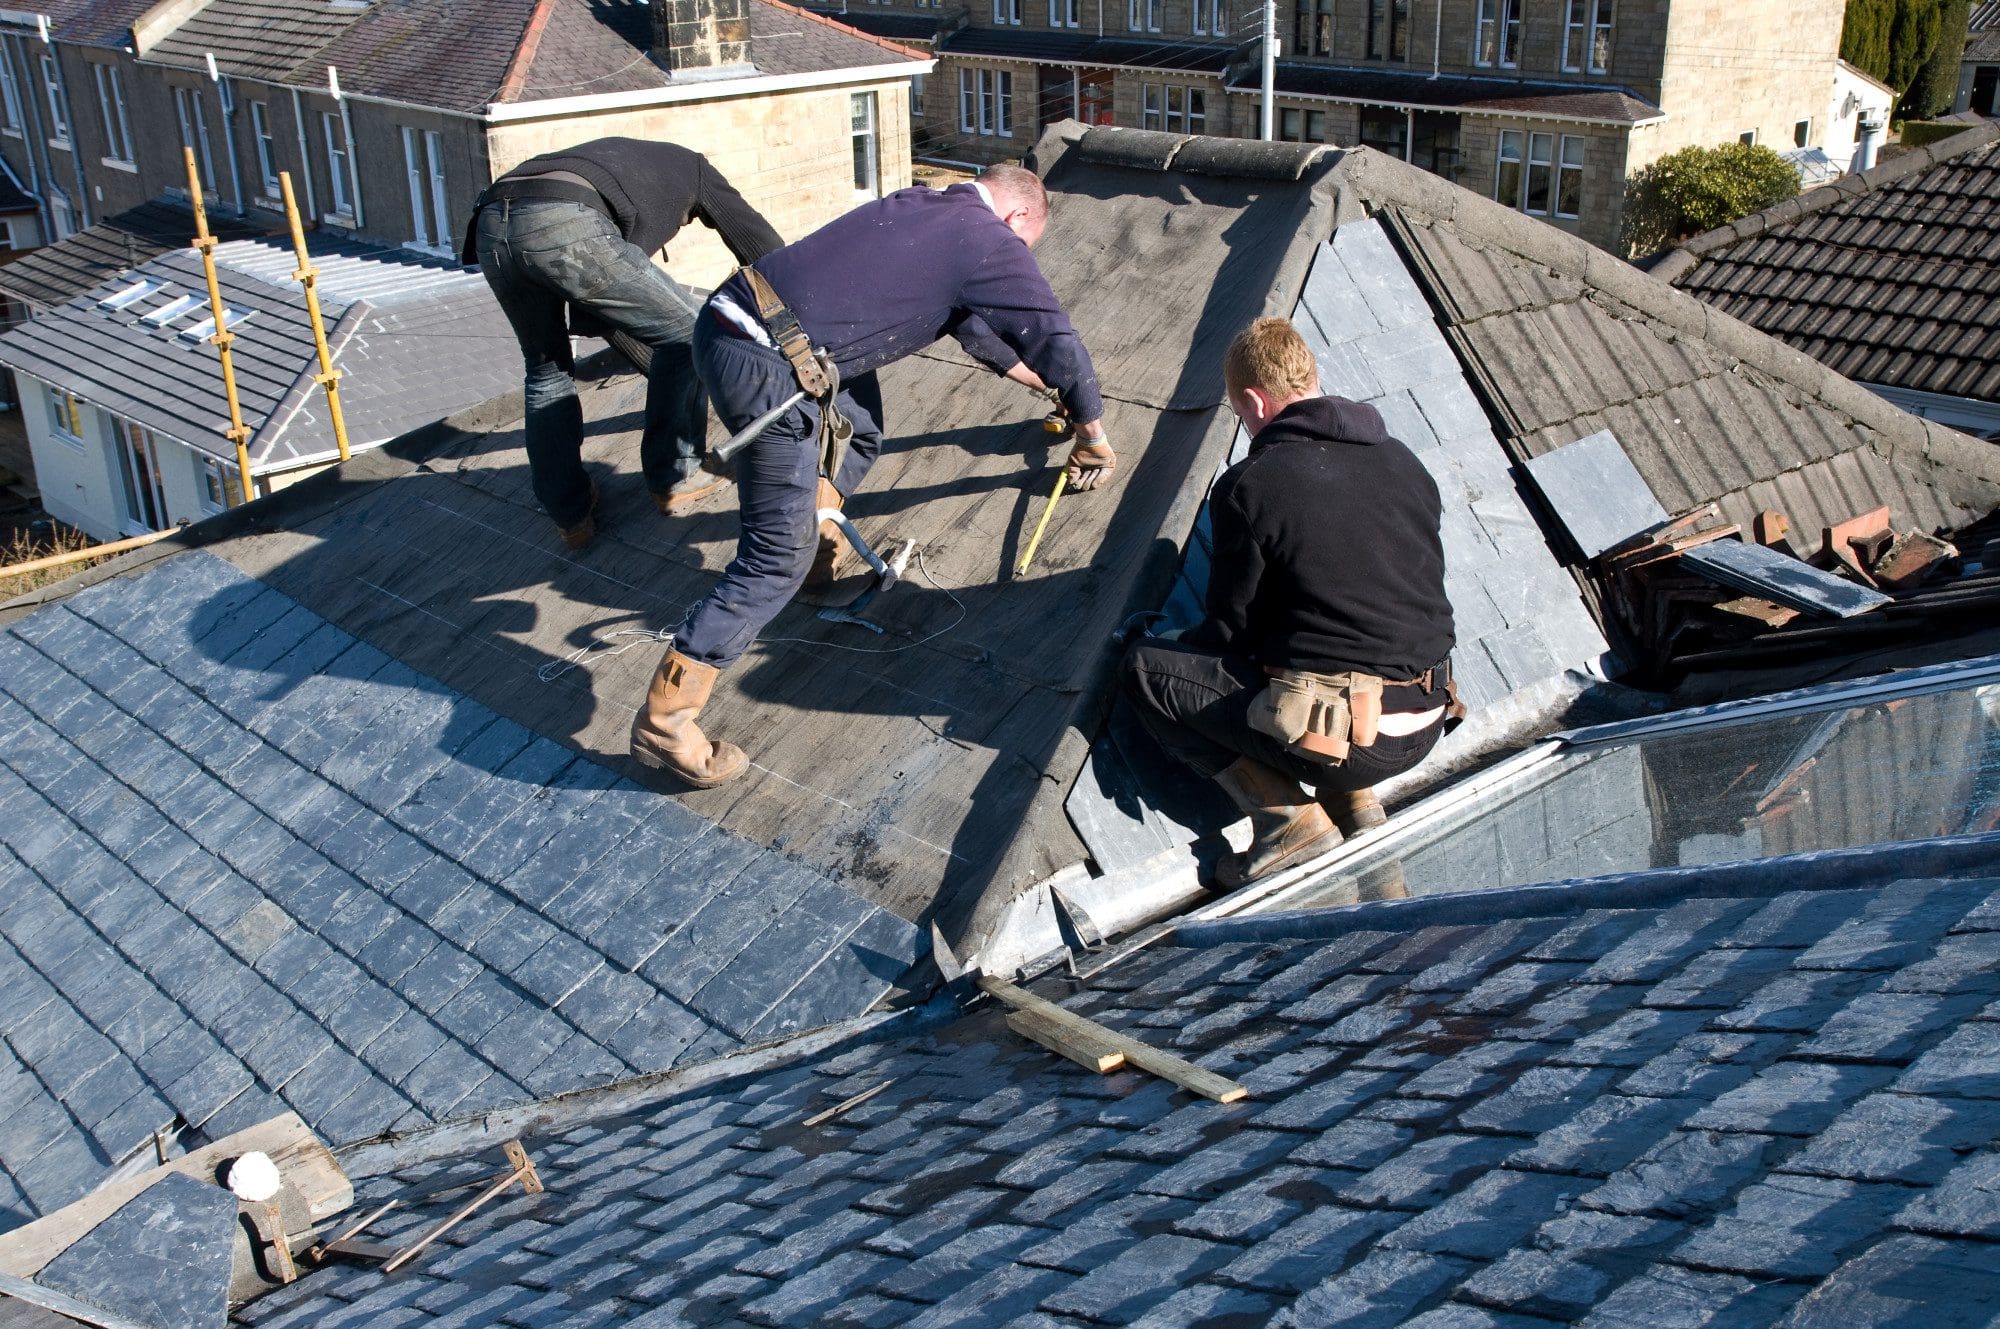 roof replacement cost